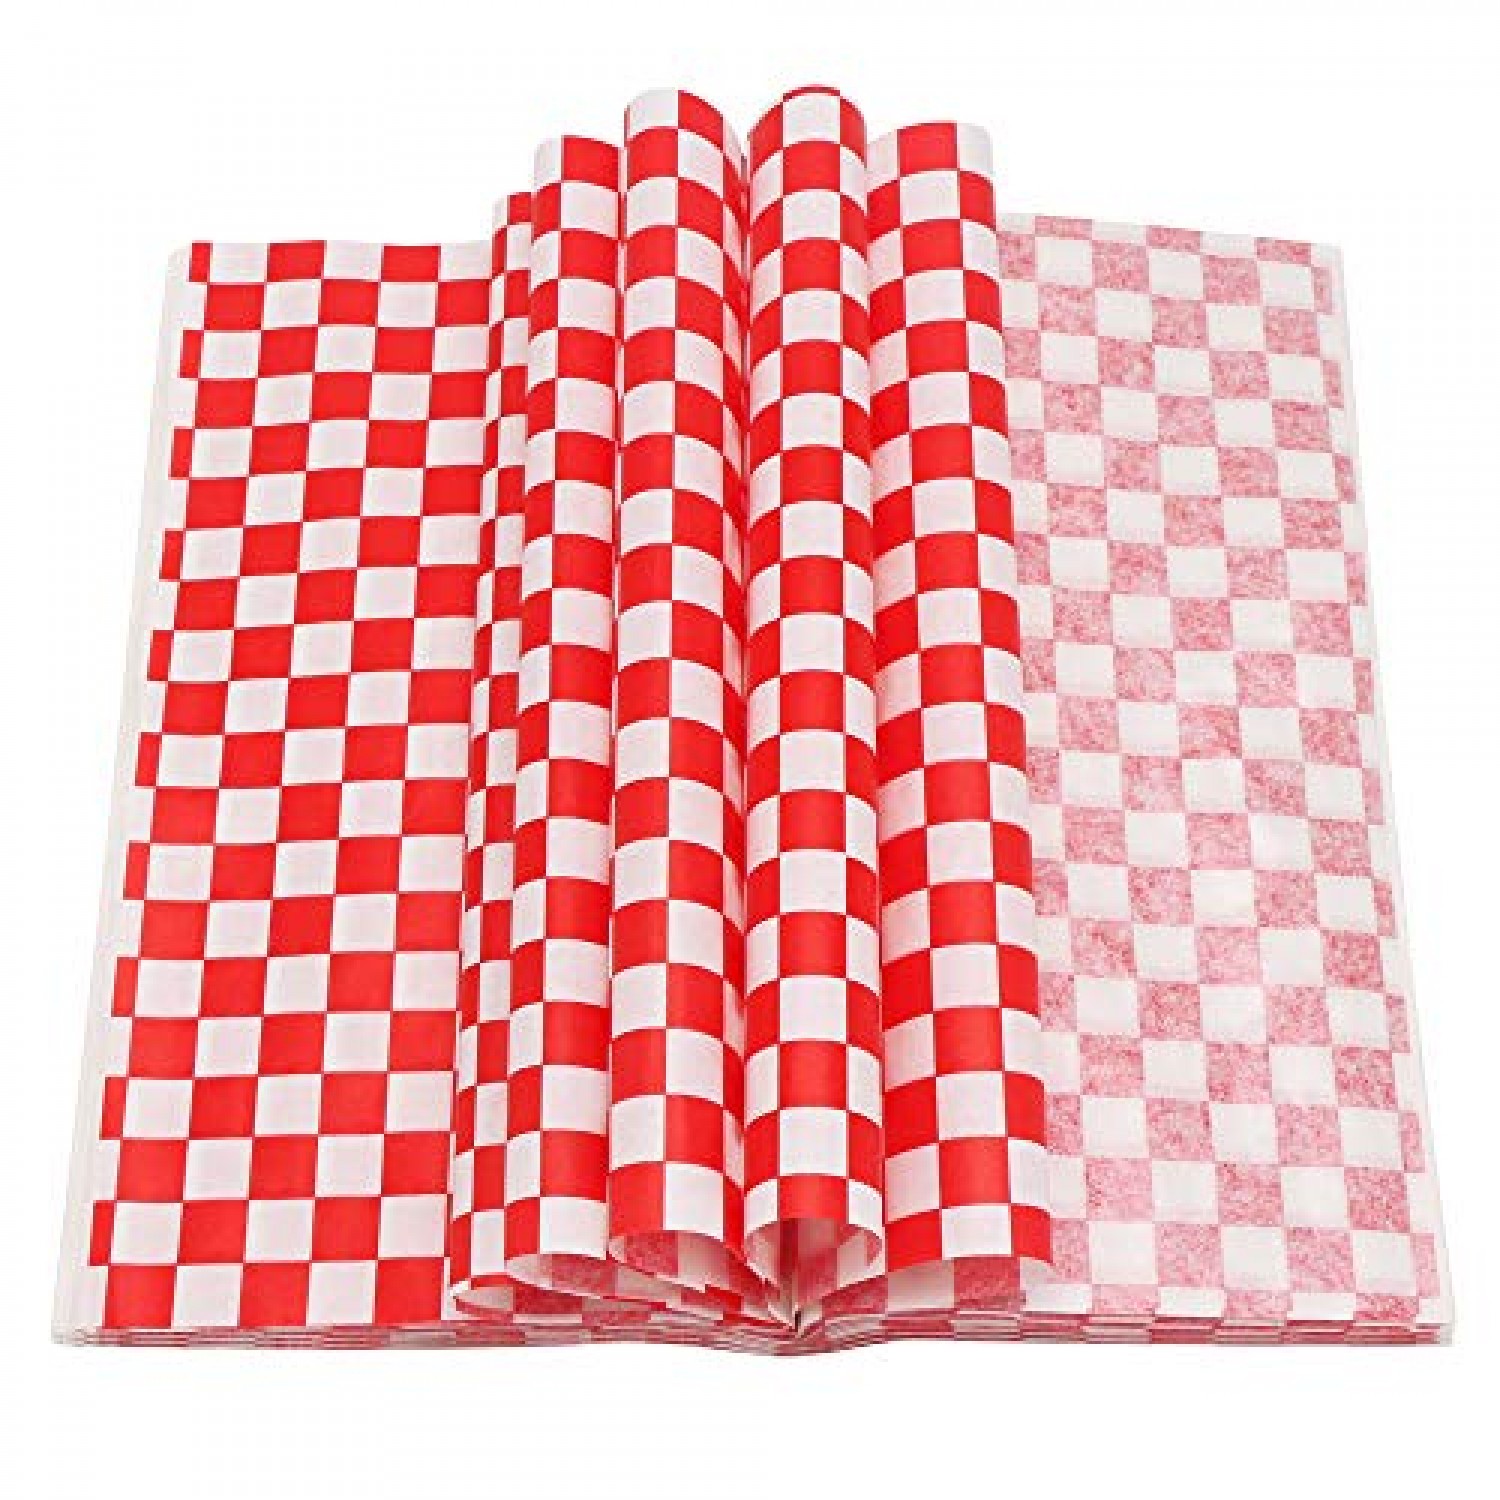 100Pcs Wax Paper Sheets for Food, Parchment Paper, Sandwich Wrapping Paper,  Basket Liners Food Picnic Paper Sheets Greaseproof Deli Wrapping Sheets